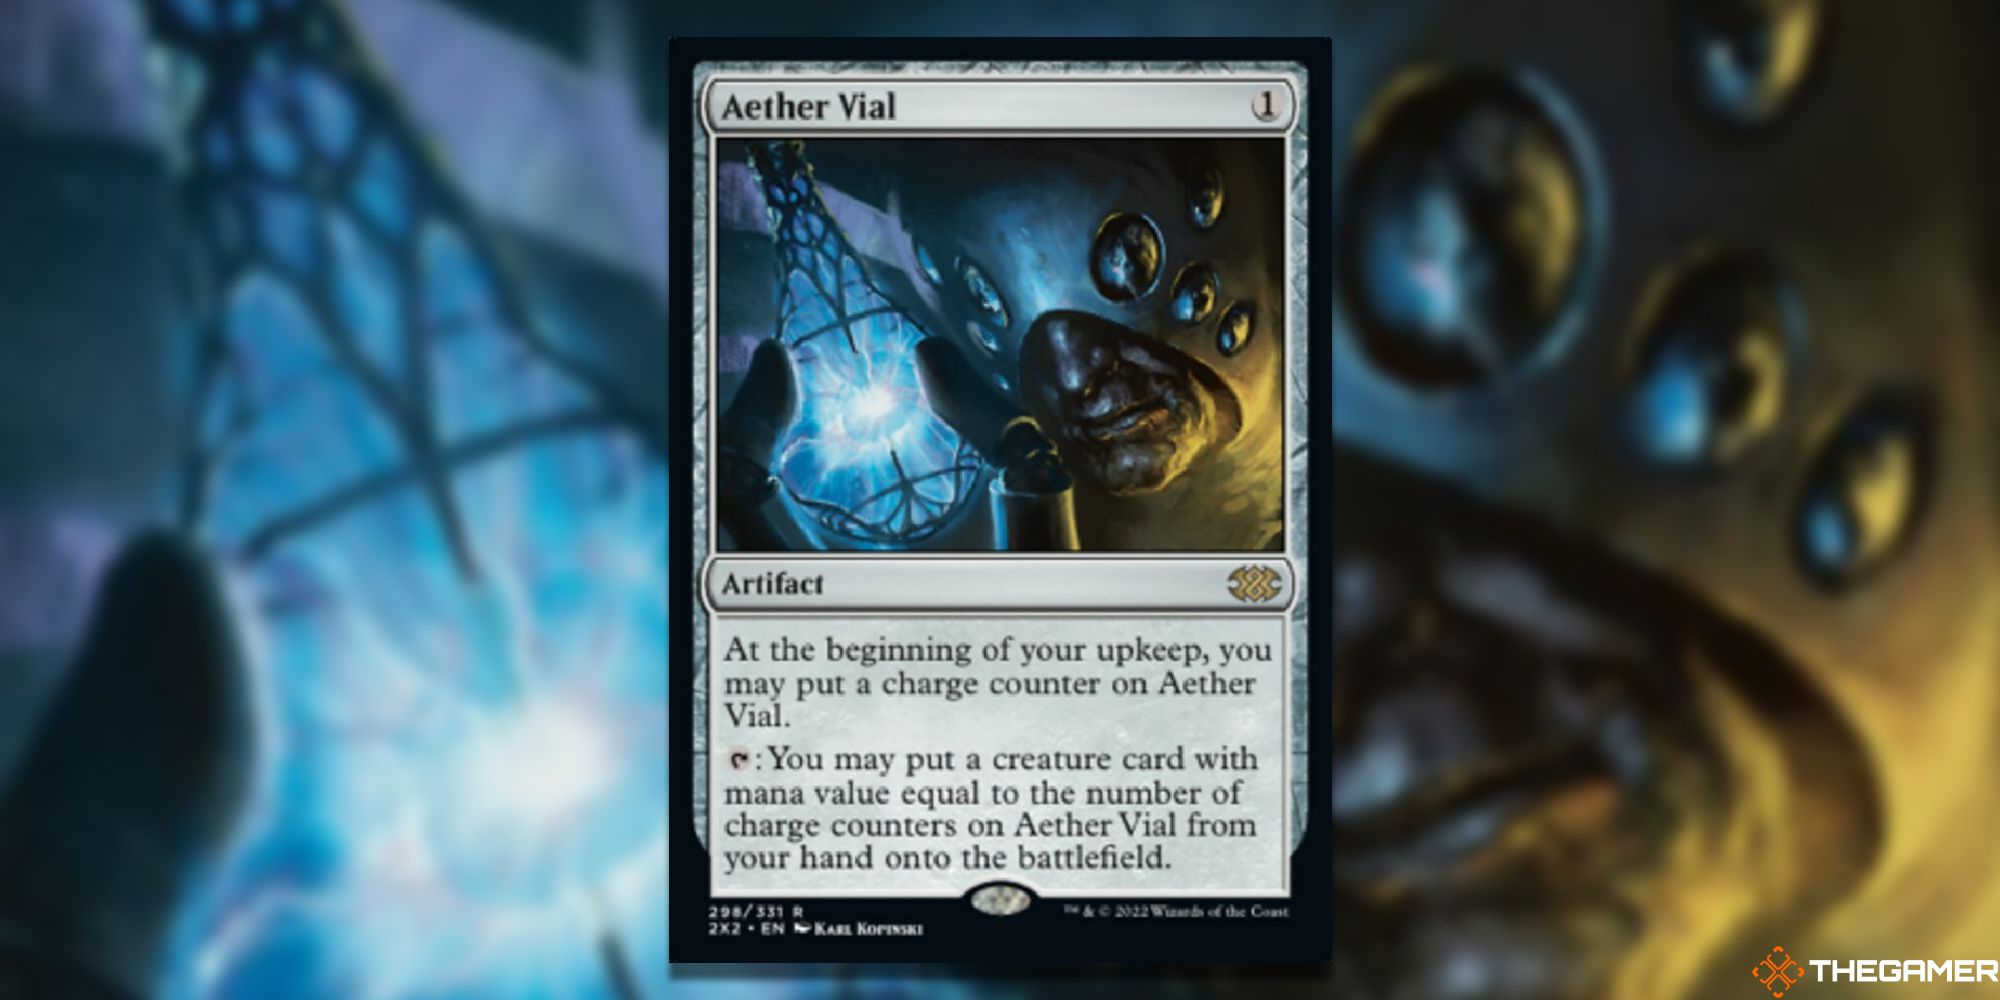 Magic: The Gathering Aether Vial full card with background